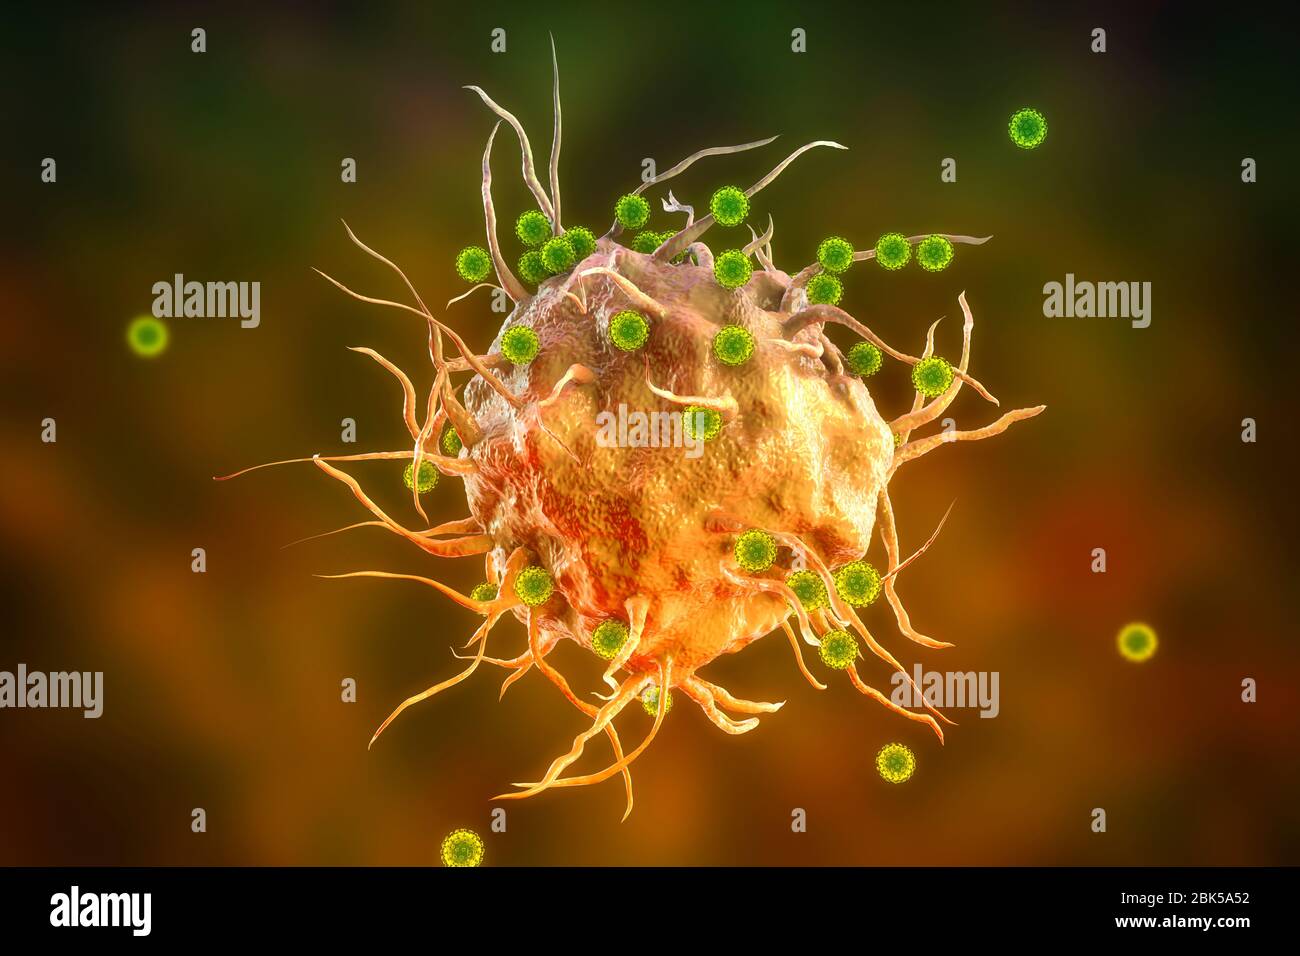 SARS-CoV-2 viruses and immune cell. Conceptual image illustrating antiviral immunity and vaccination. Stock Photo